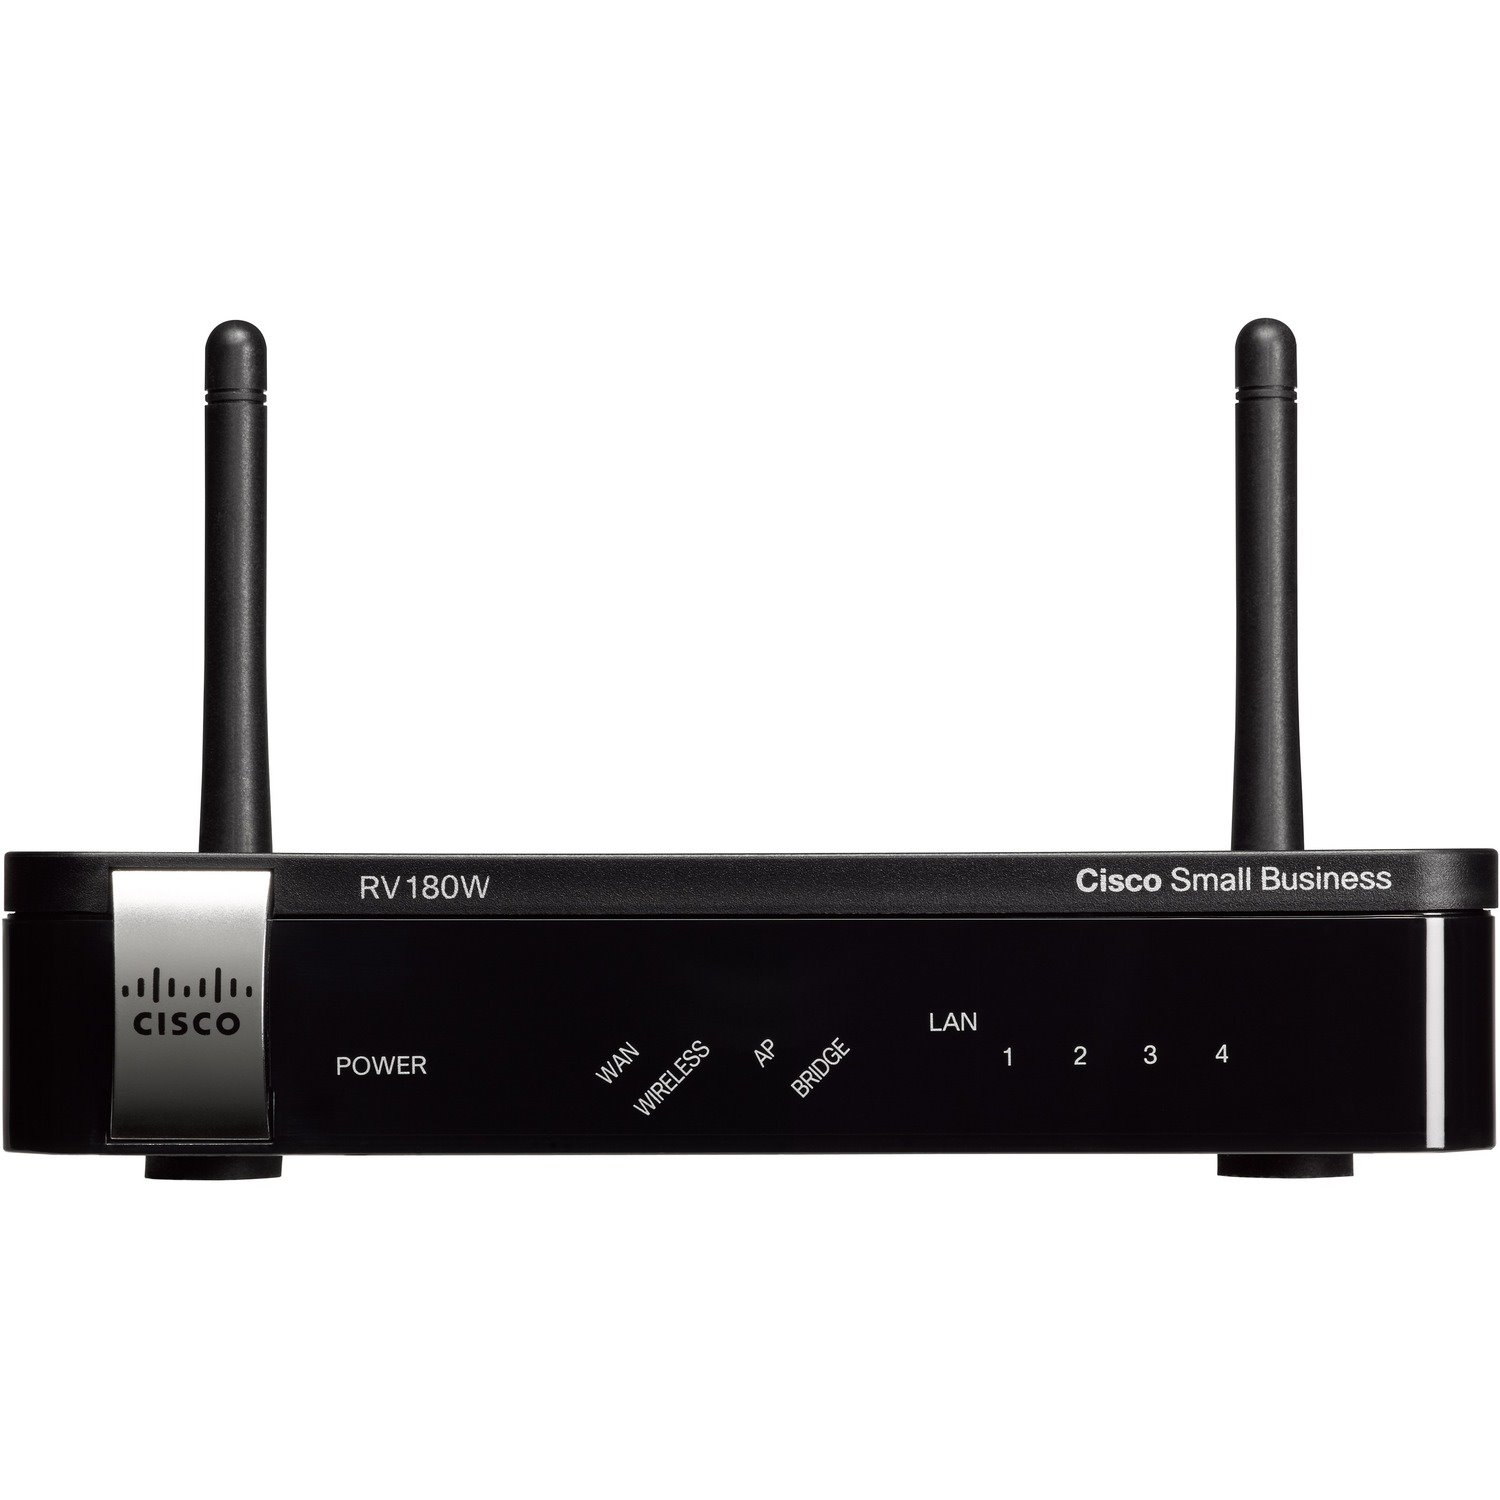 Cisco RV180W Wi-Fi 4 IEEE 802.11n Ethernet Wireless Security Router - Refurbished